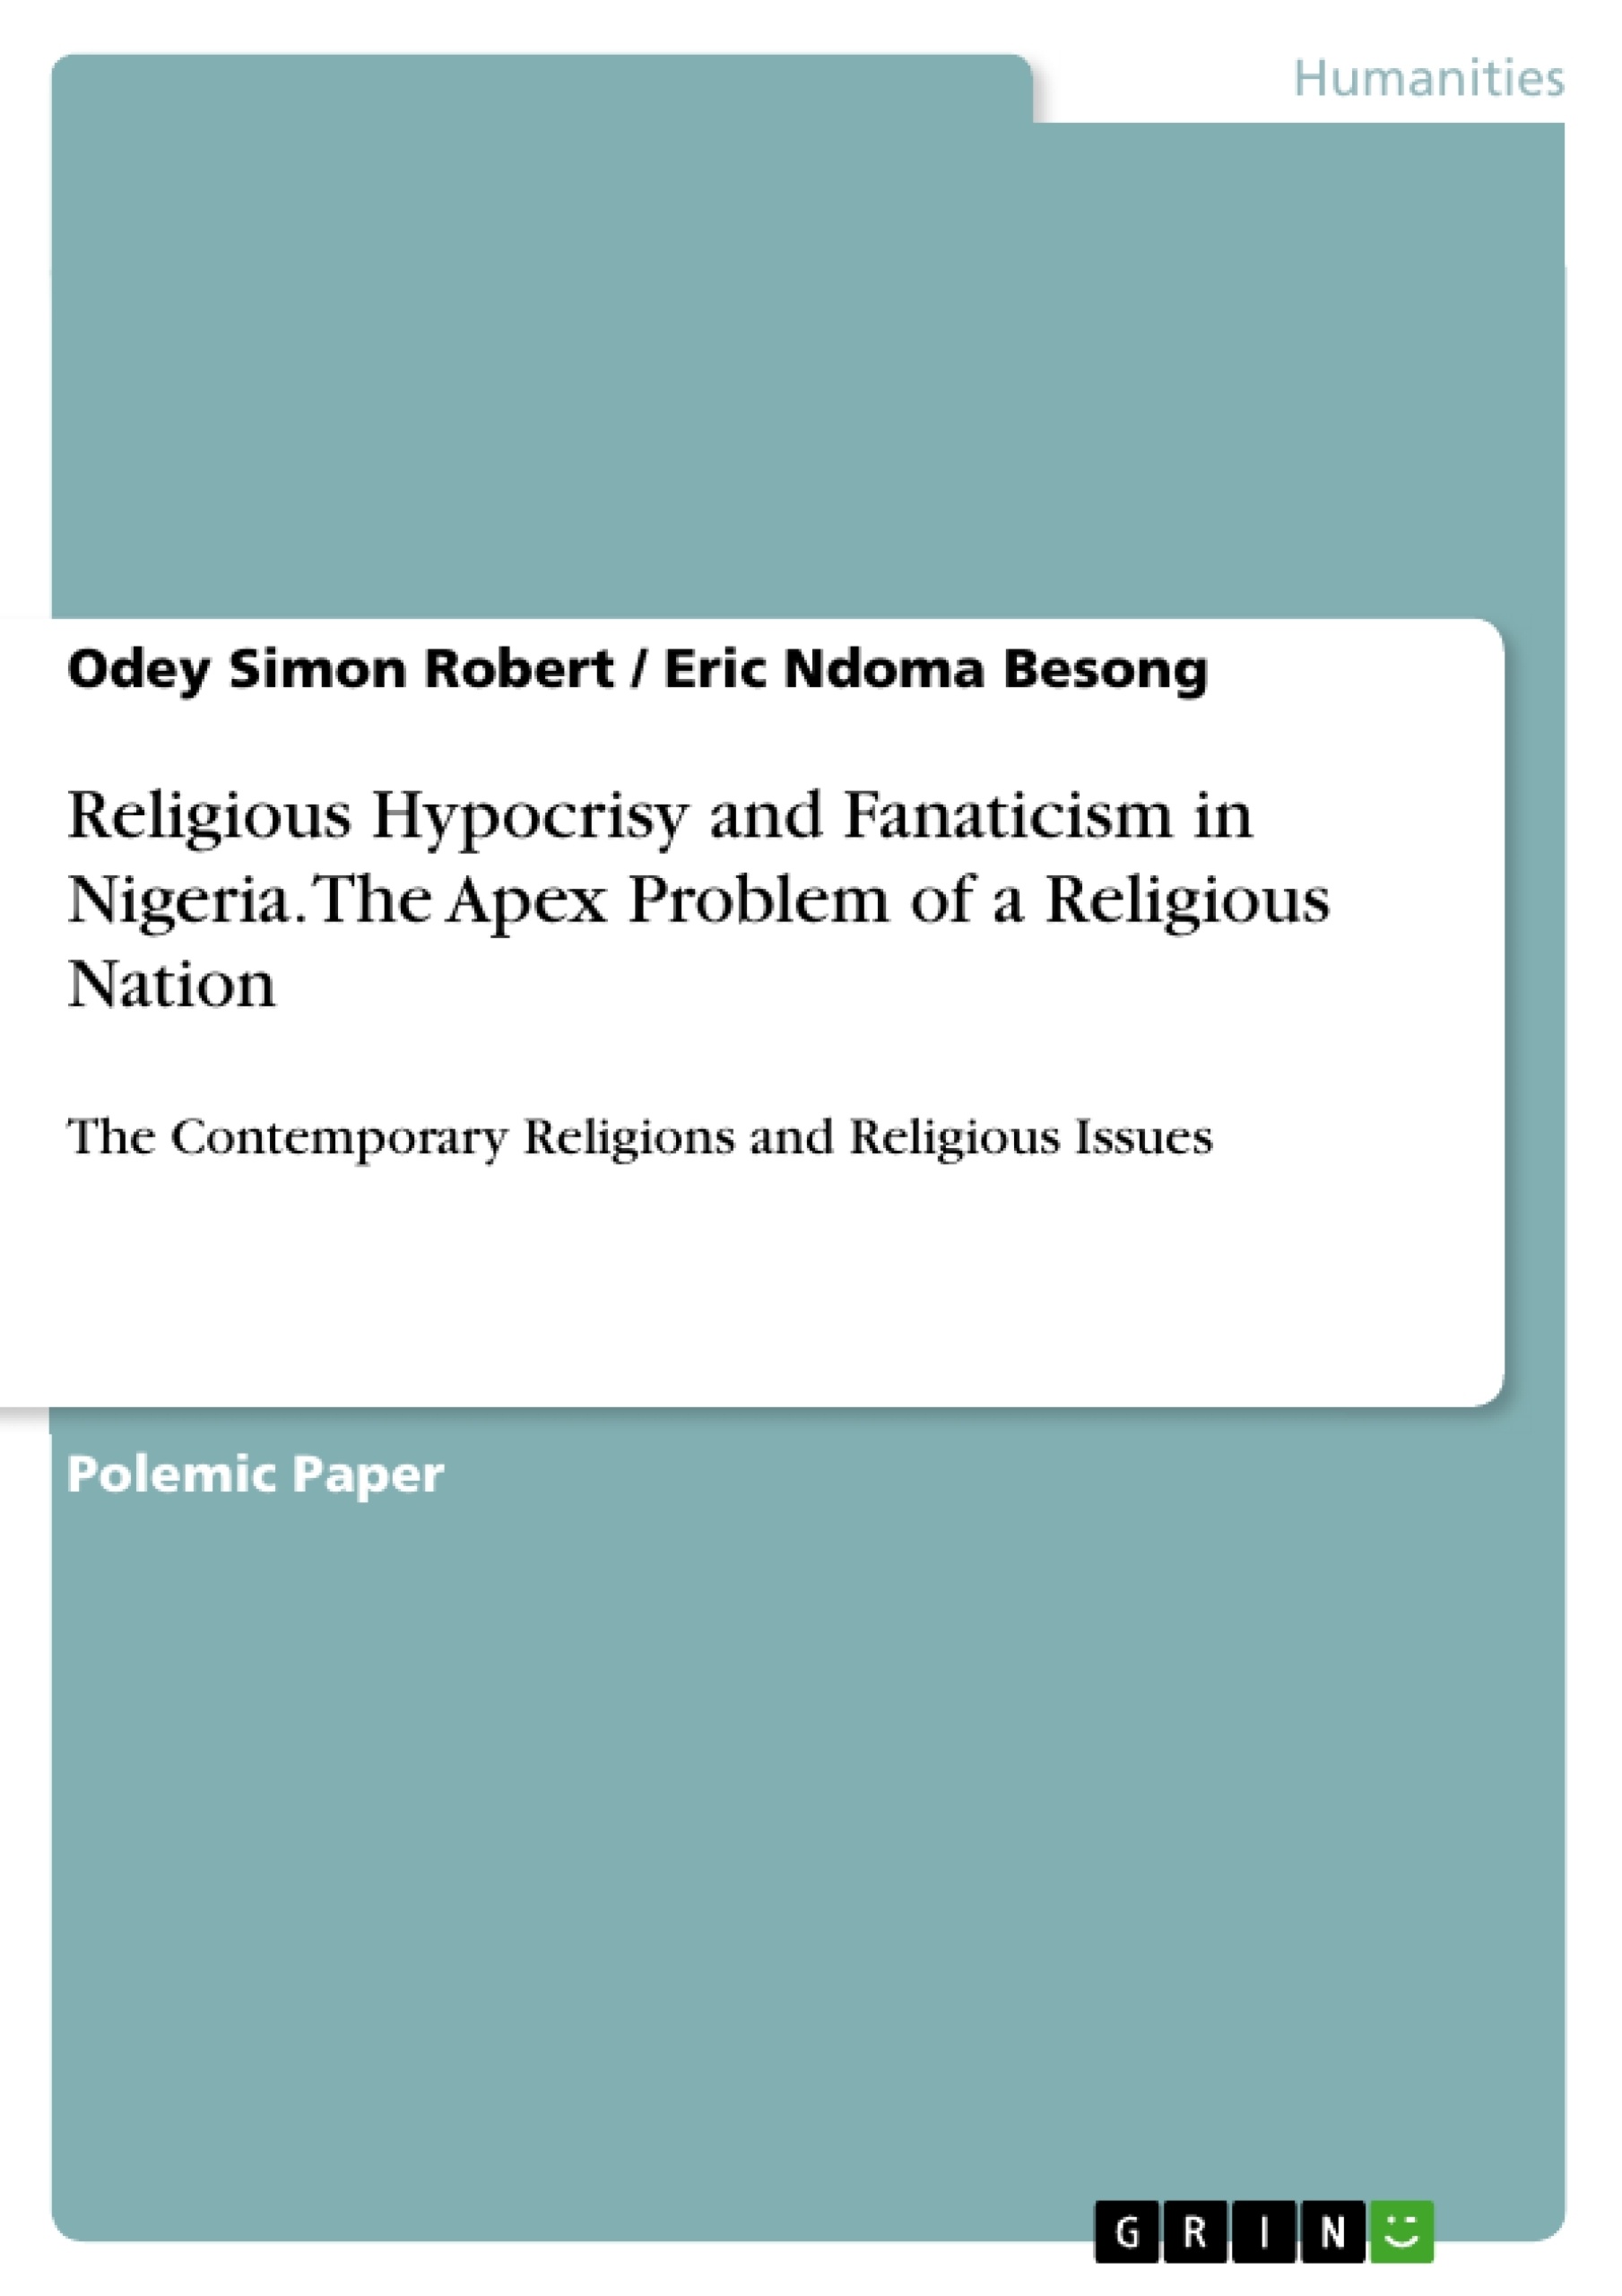 Título: Religious Hypocrisy and Fanaticism in Nigeria. The Apex Problem of a Religious Nation